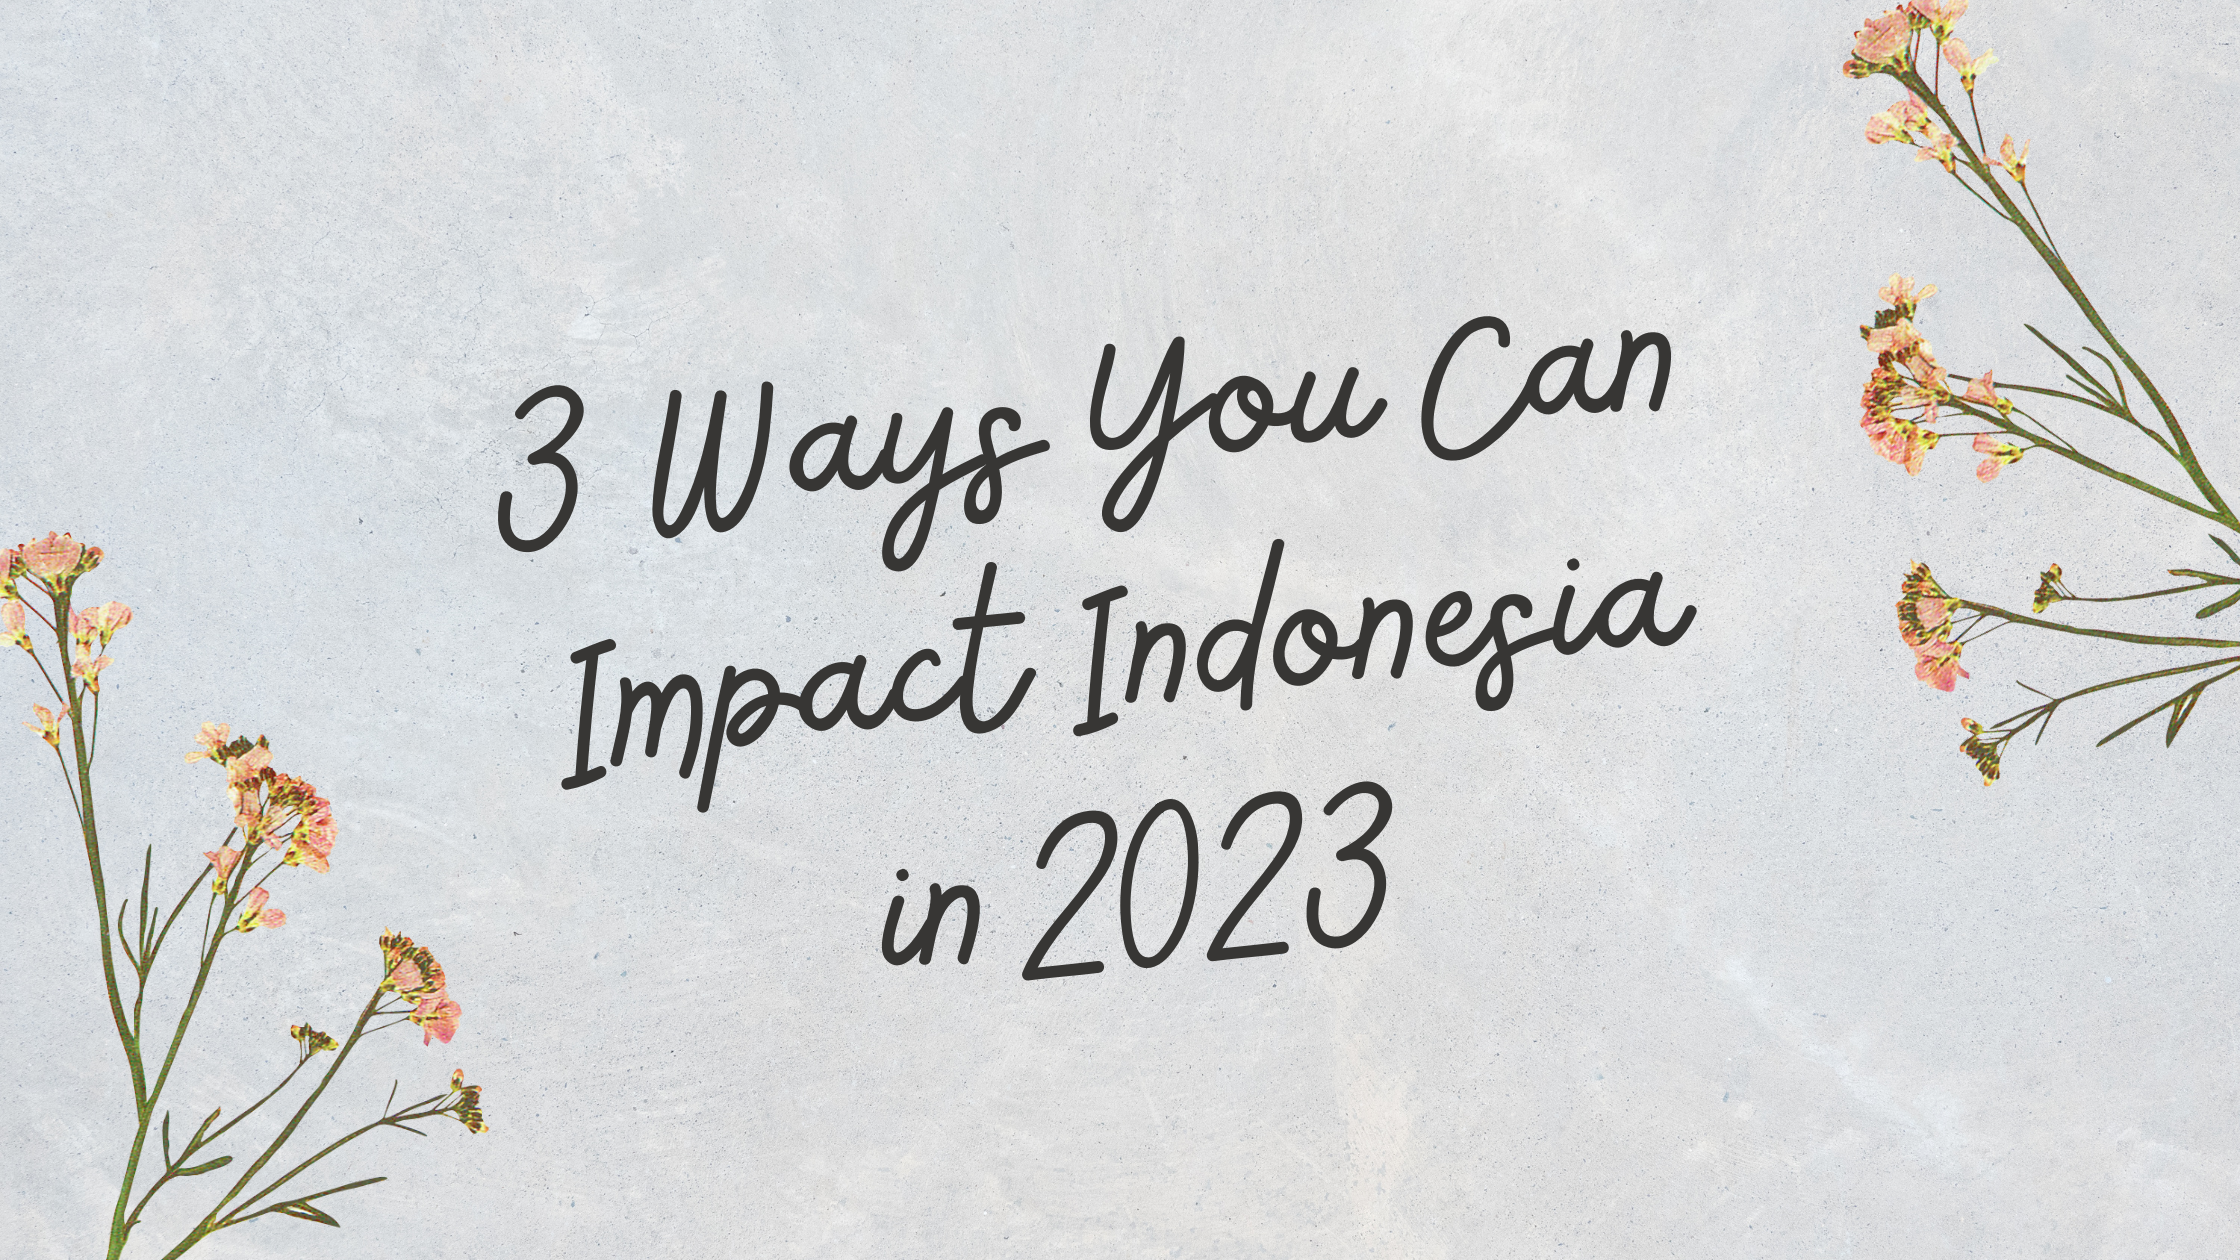 3 Ways You Can Impact Indonesia in 2023